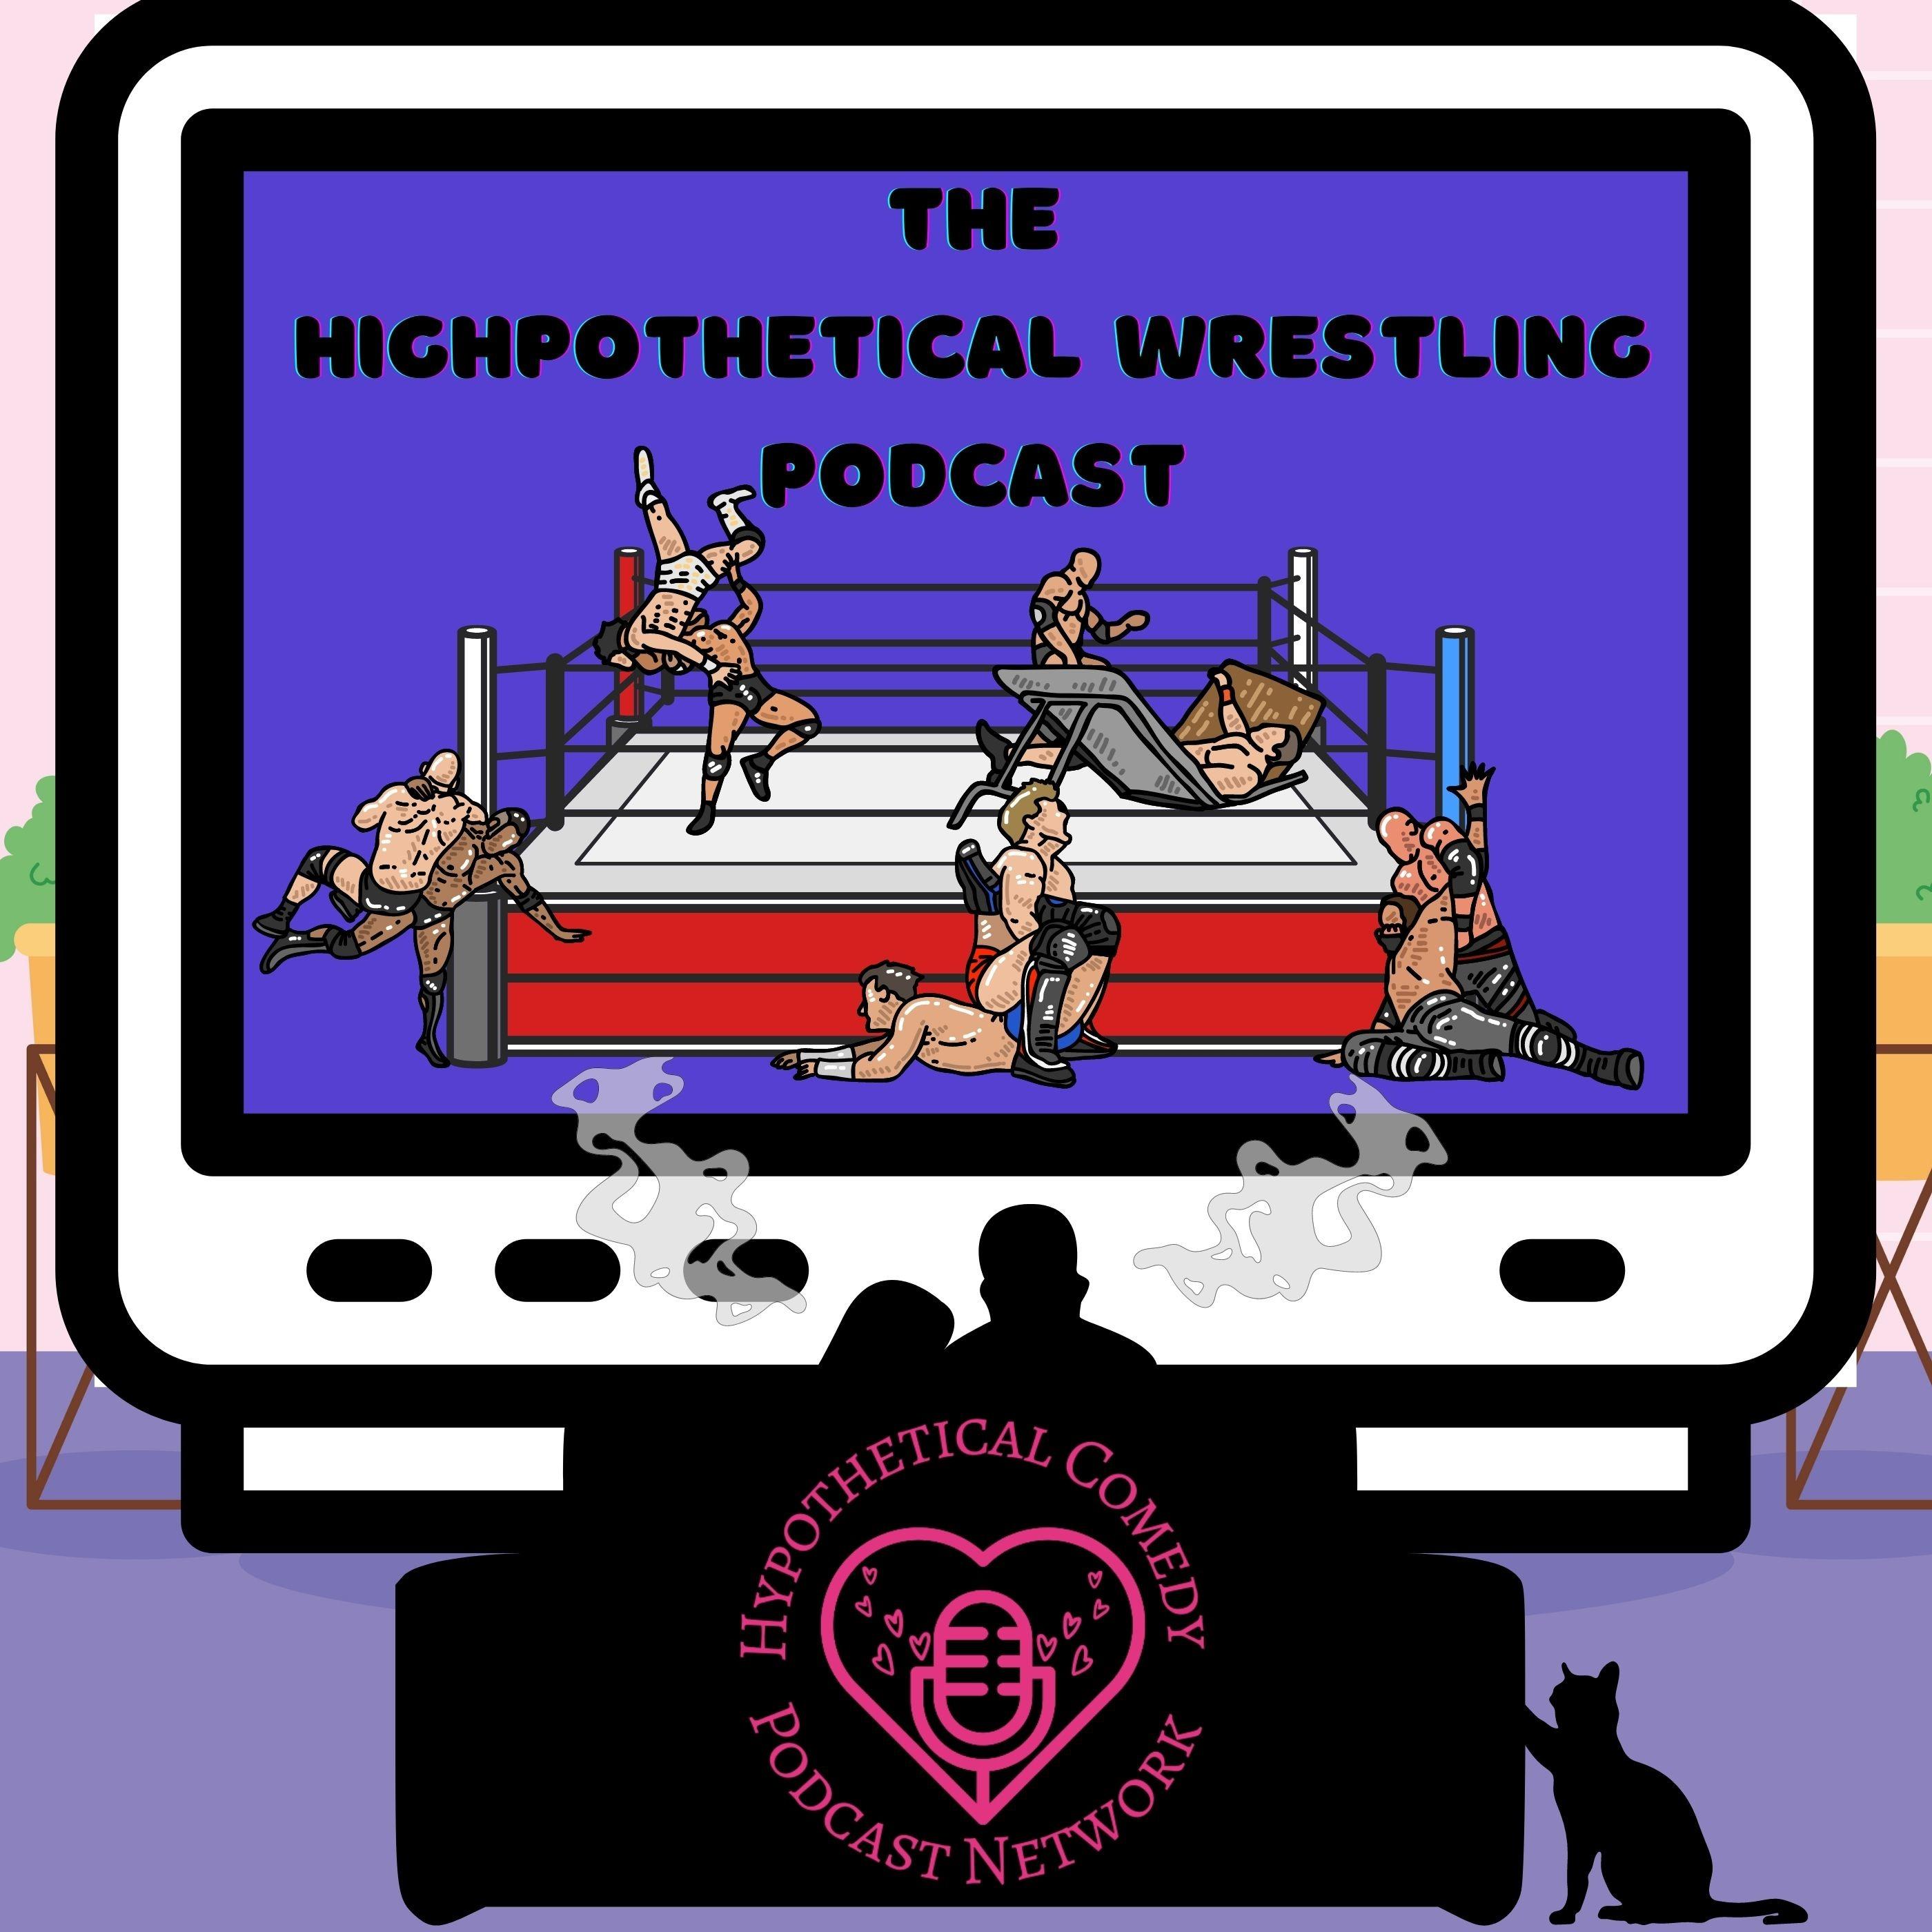 The Highpothetical Wrestling Podcast